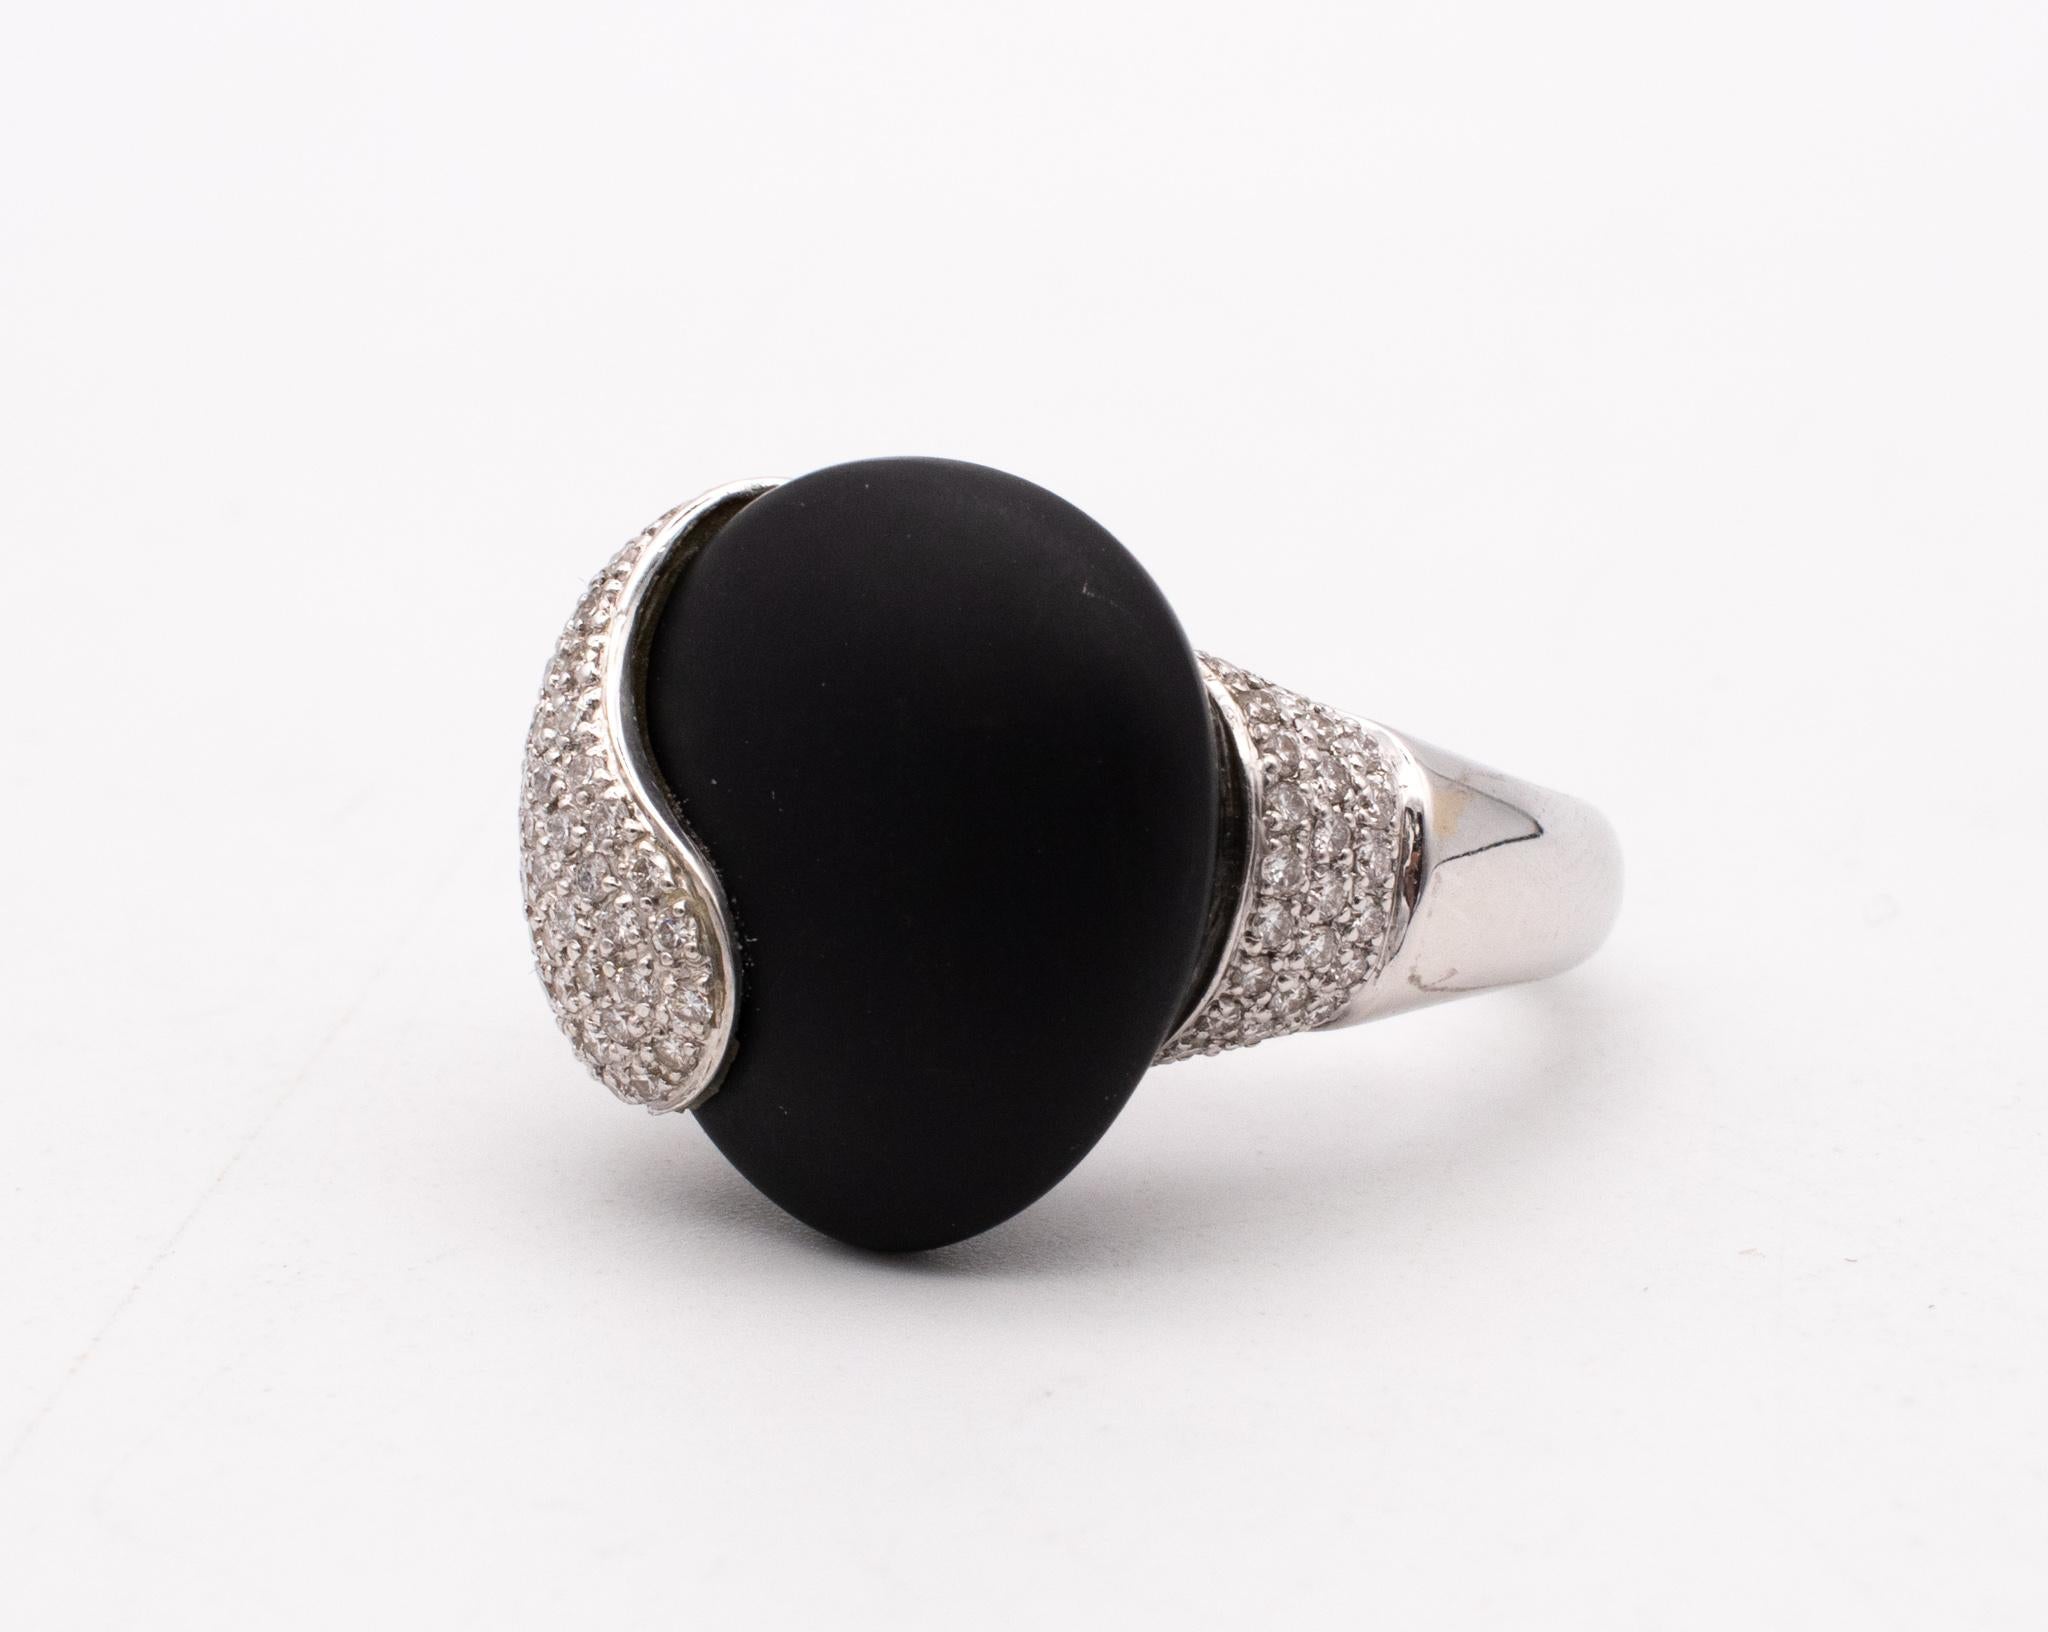 Meister of Zurich 18kt White Gold Ring with VS Diamonds and Frosted Black Onyx 3